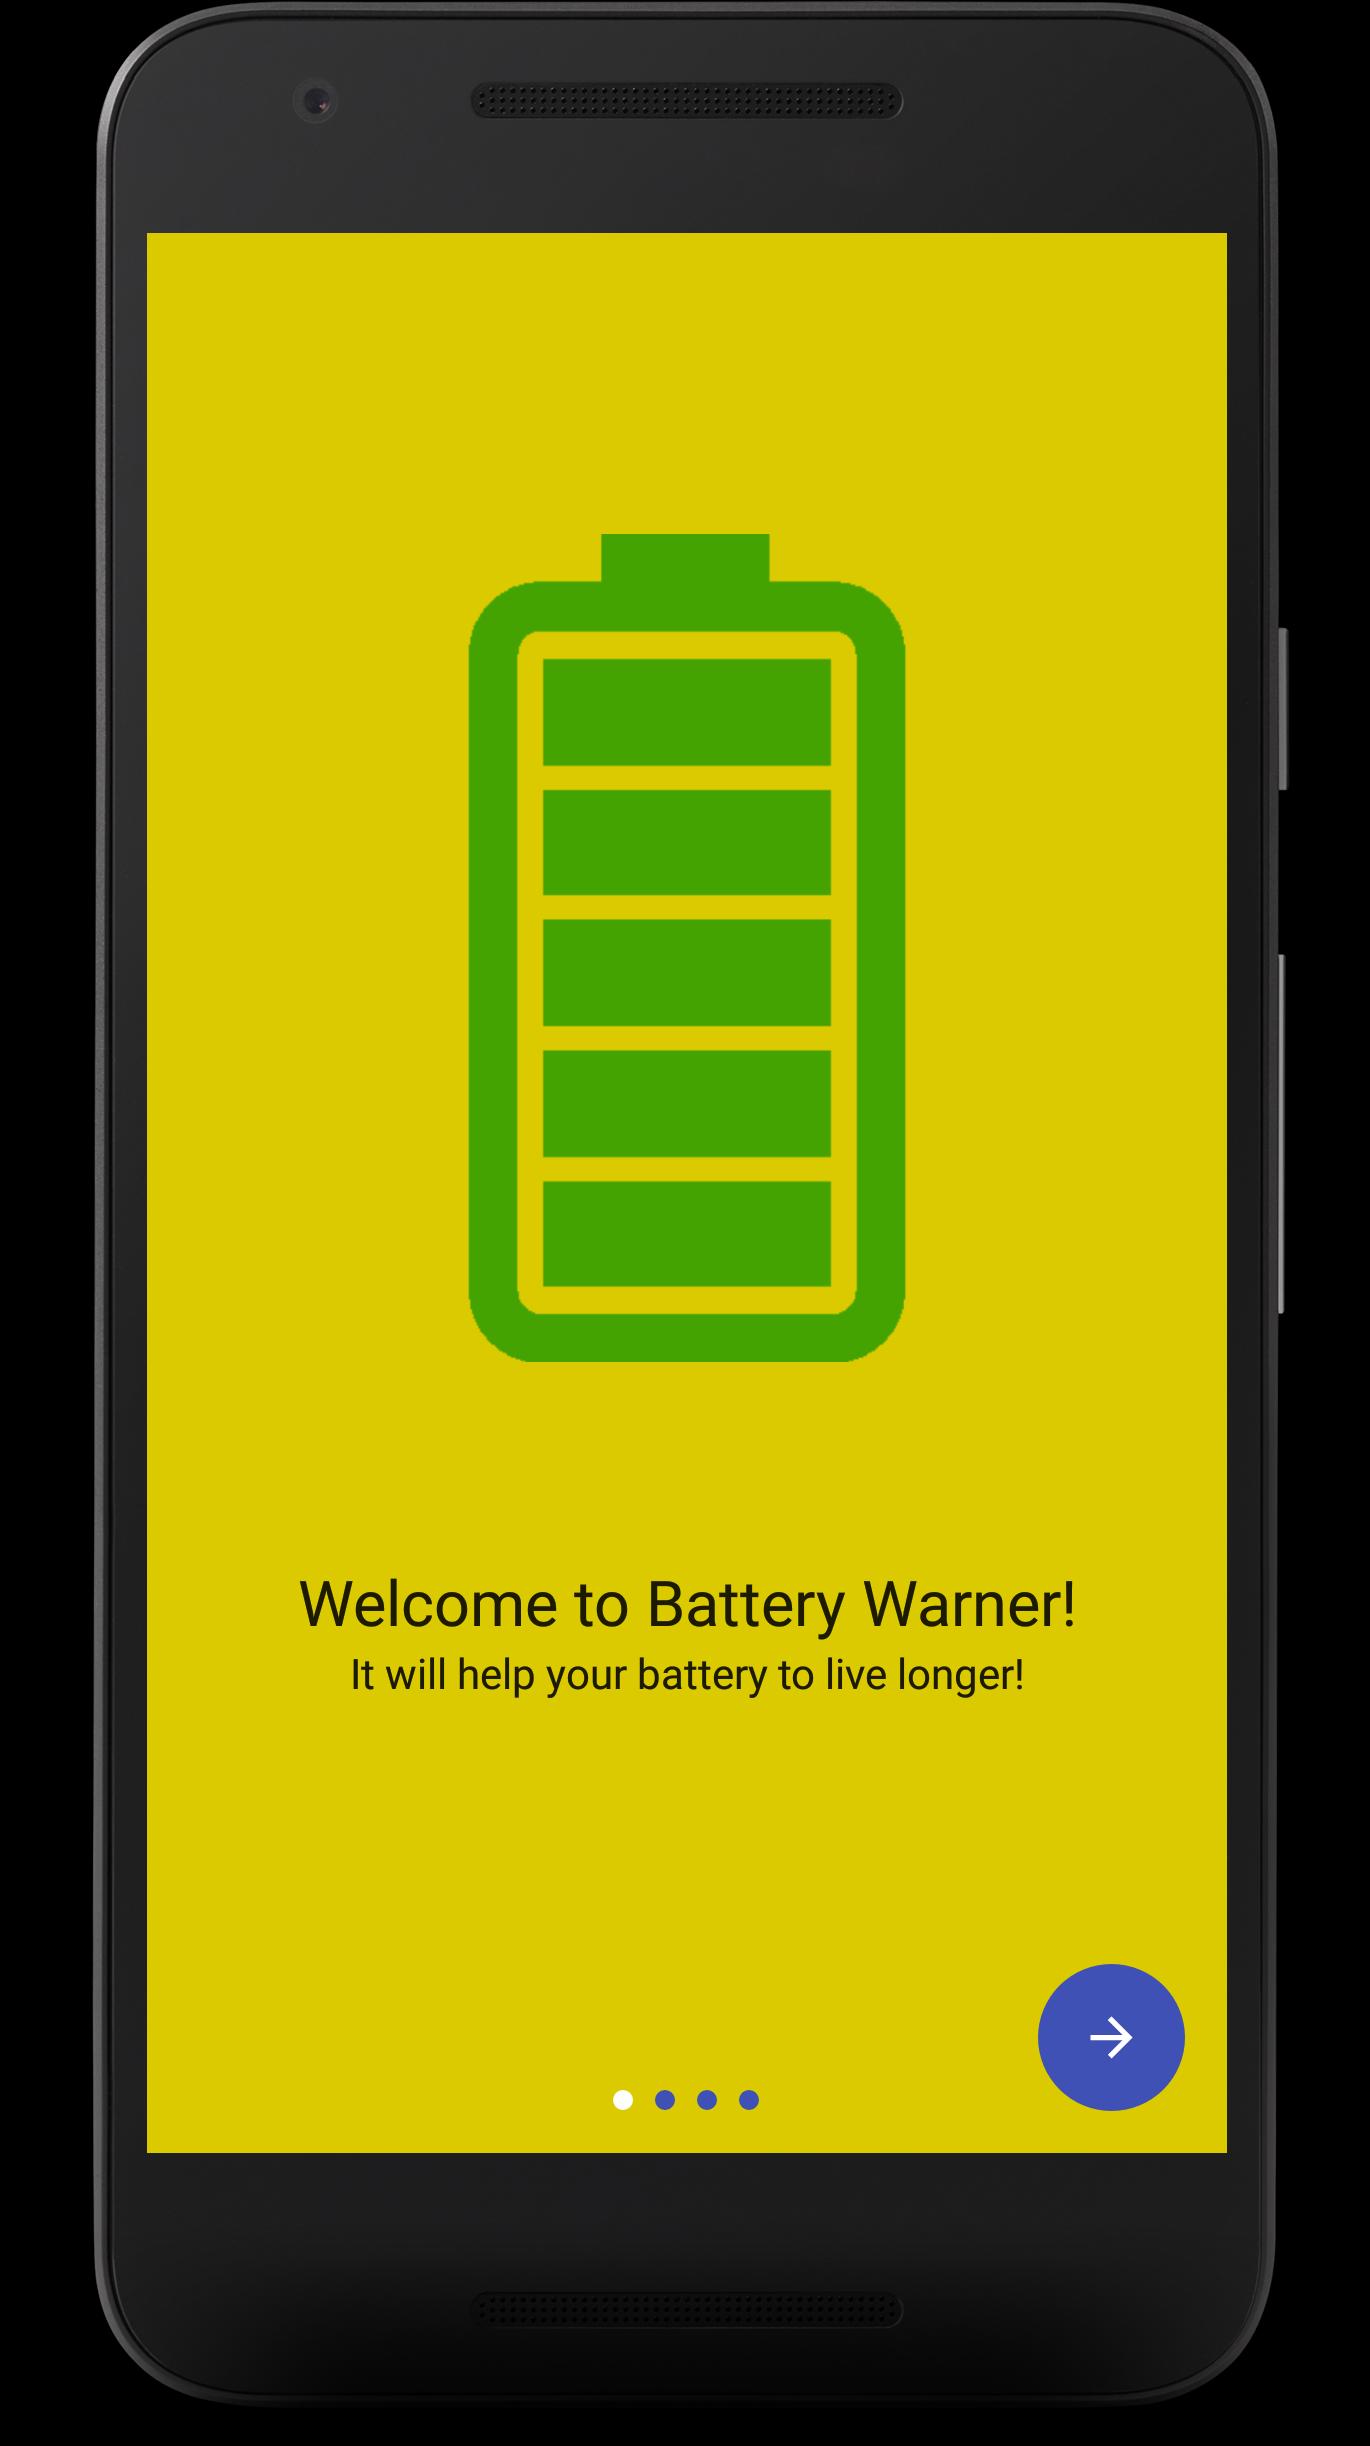 Android Low Battery. Low Battery Warning. Battery Warning Card.